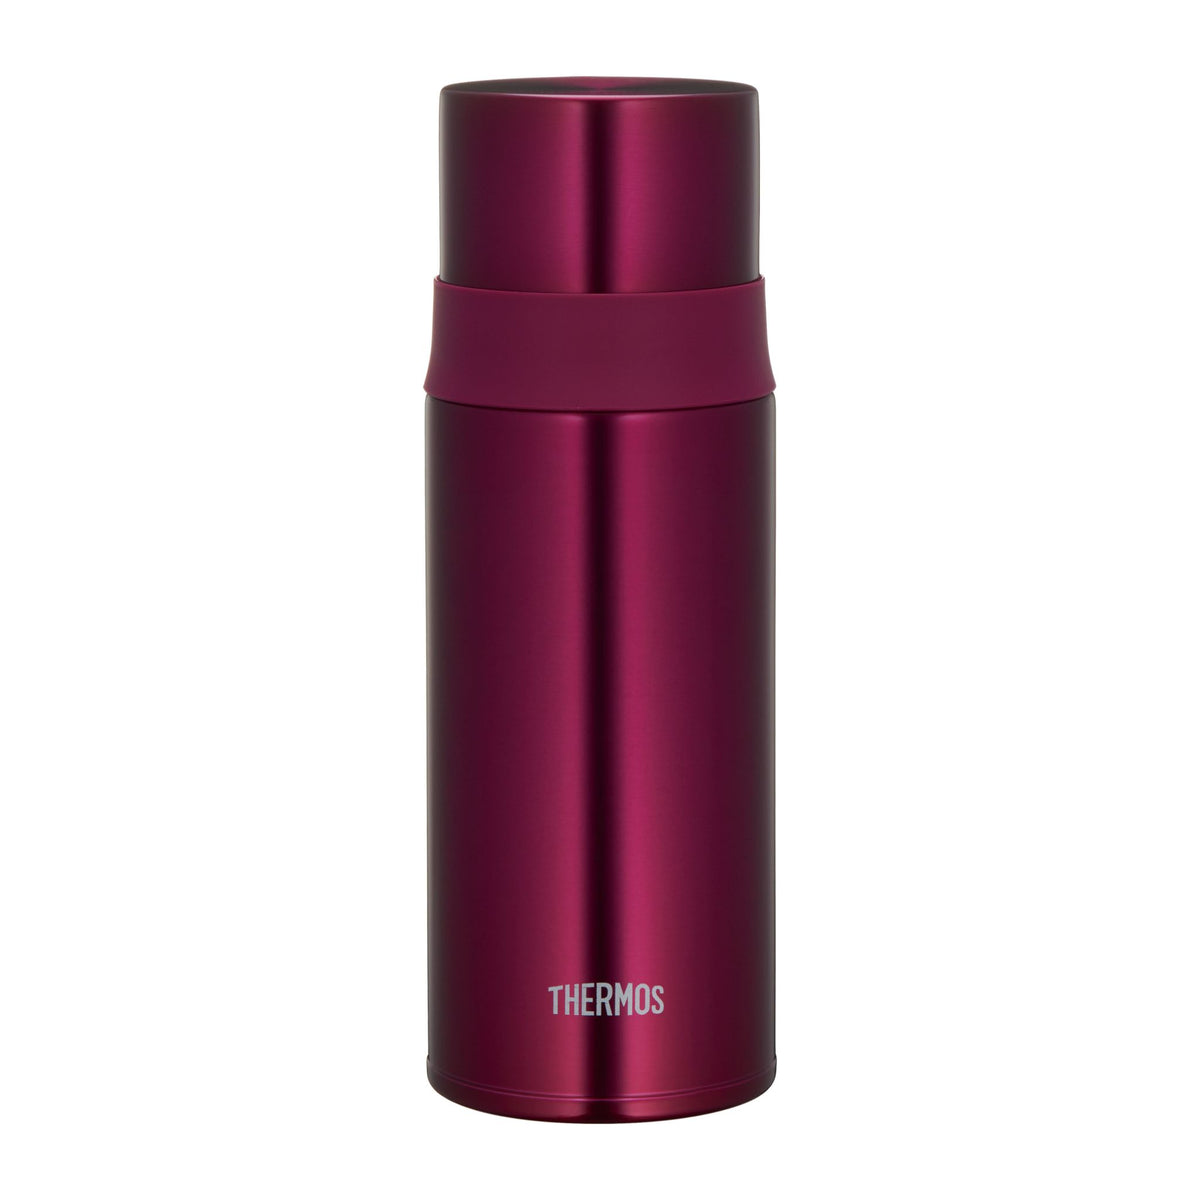 Thermos 350ml Stainless Steel Vacuum Insulated Flask with Cup - Burgun ...